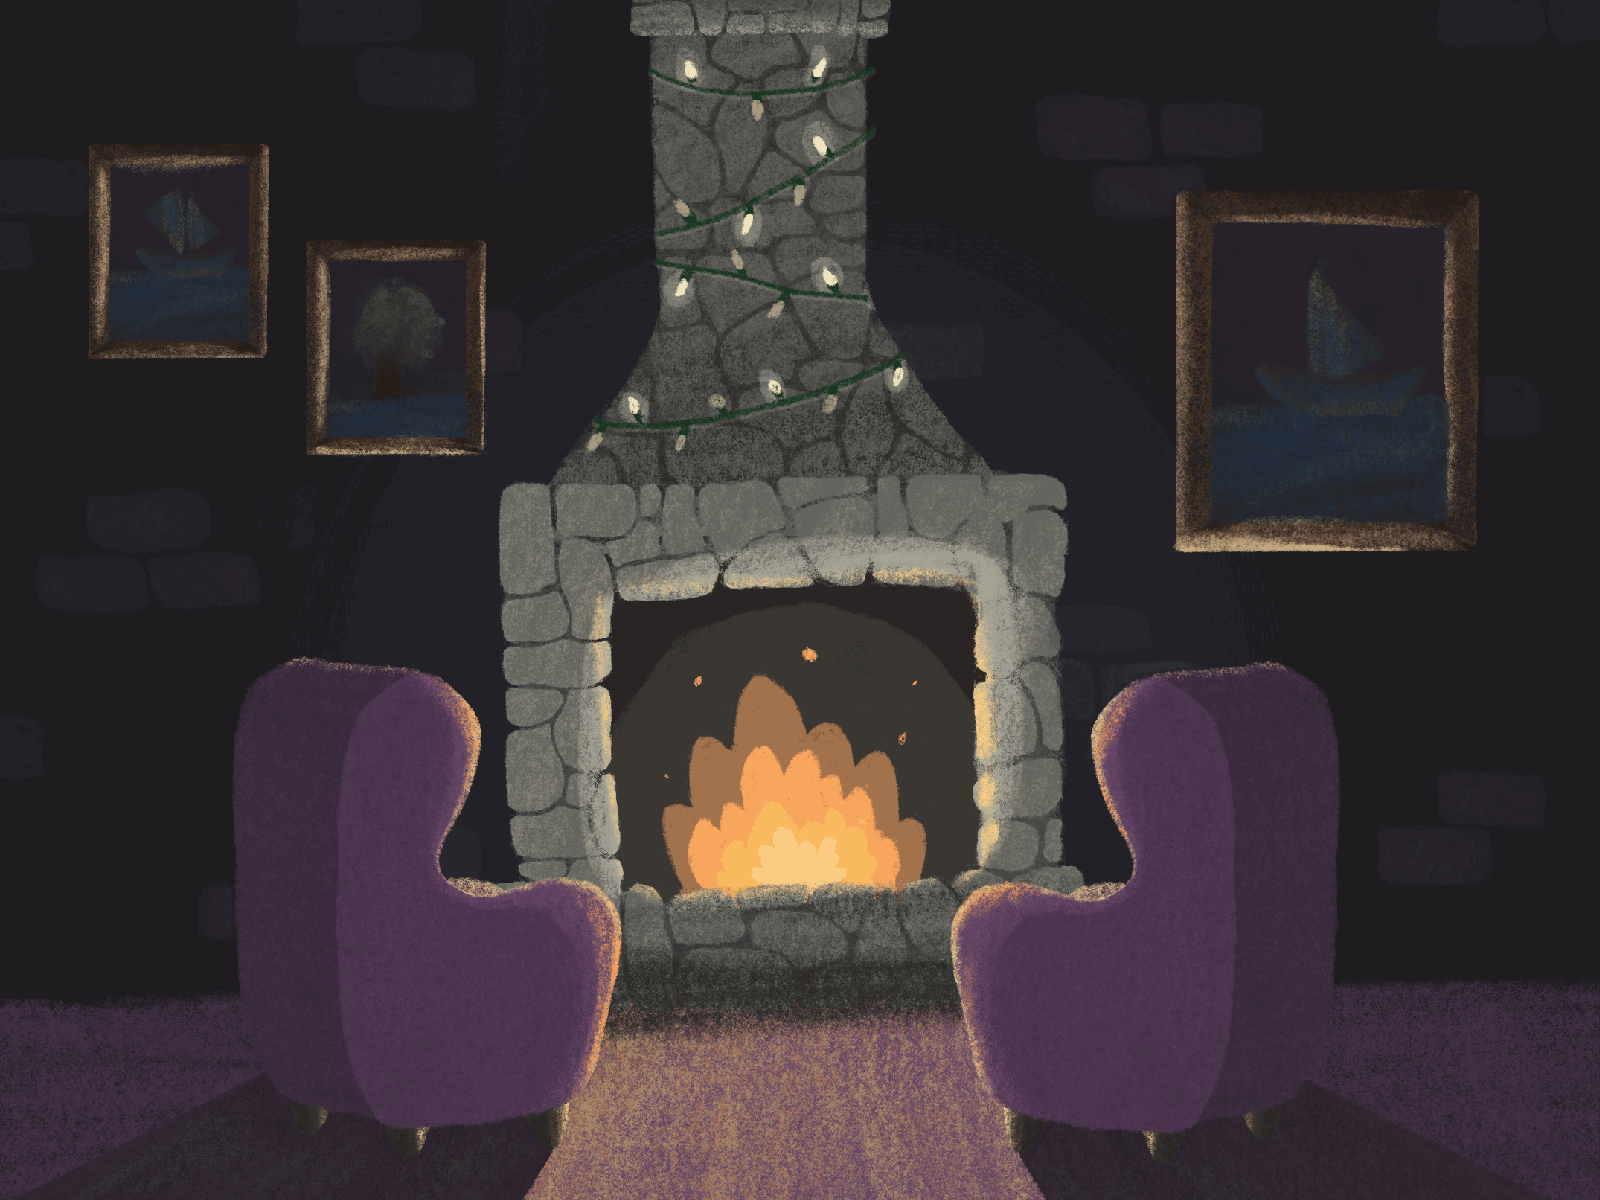 Fireplace evening candle castle chair christmas cozy design digital illustration digitalpainting evening fire fireplace fireside illustration lights paint purple walls warmth